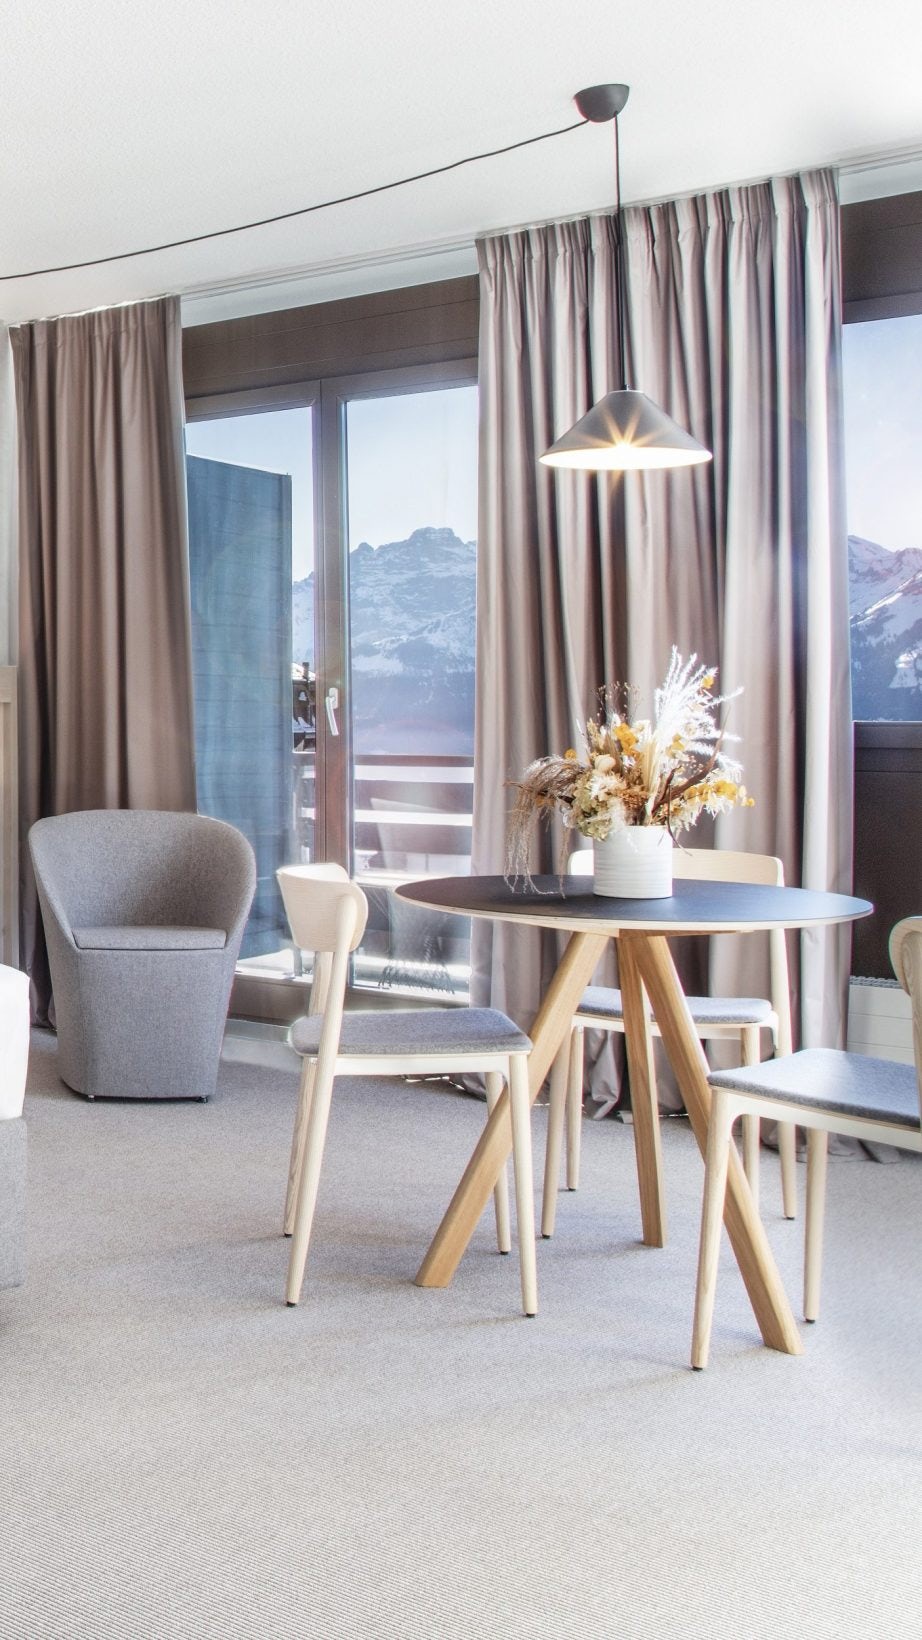 Comfort and sustainability in Villars